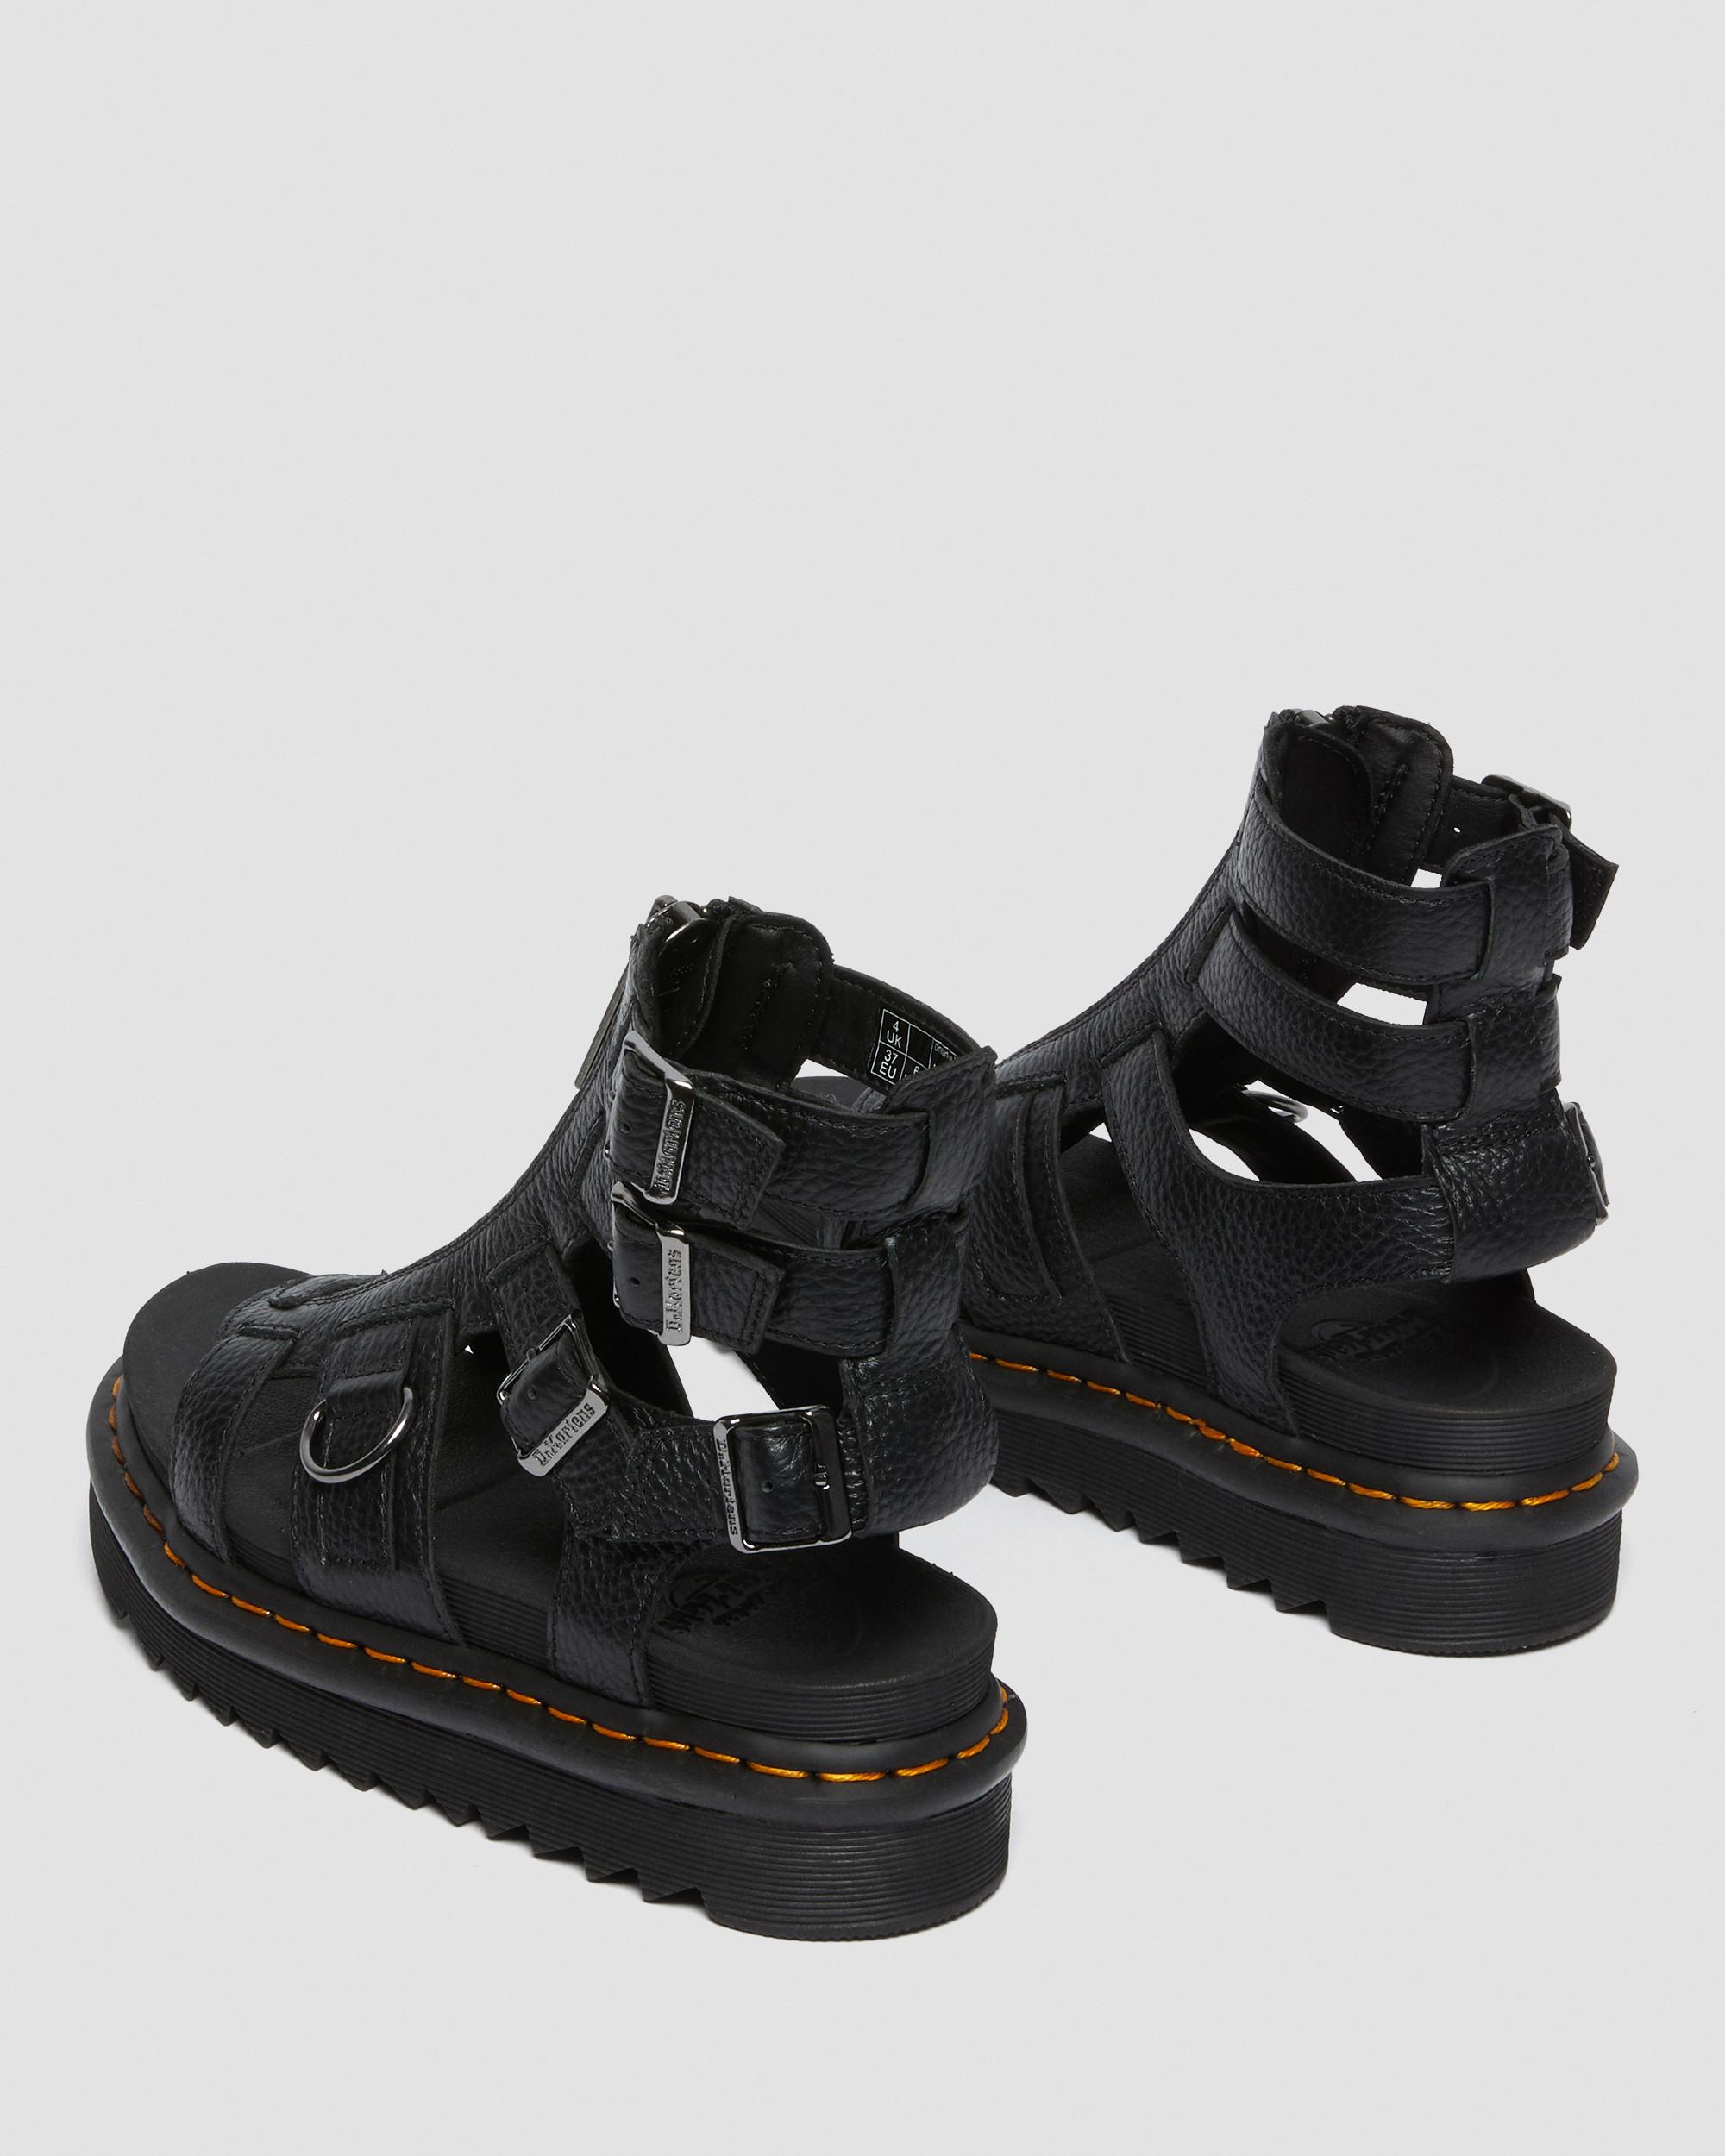 DR MARTENS Olson Zipped Leather Strap Sandals